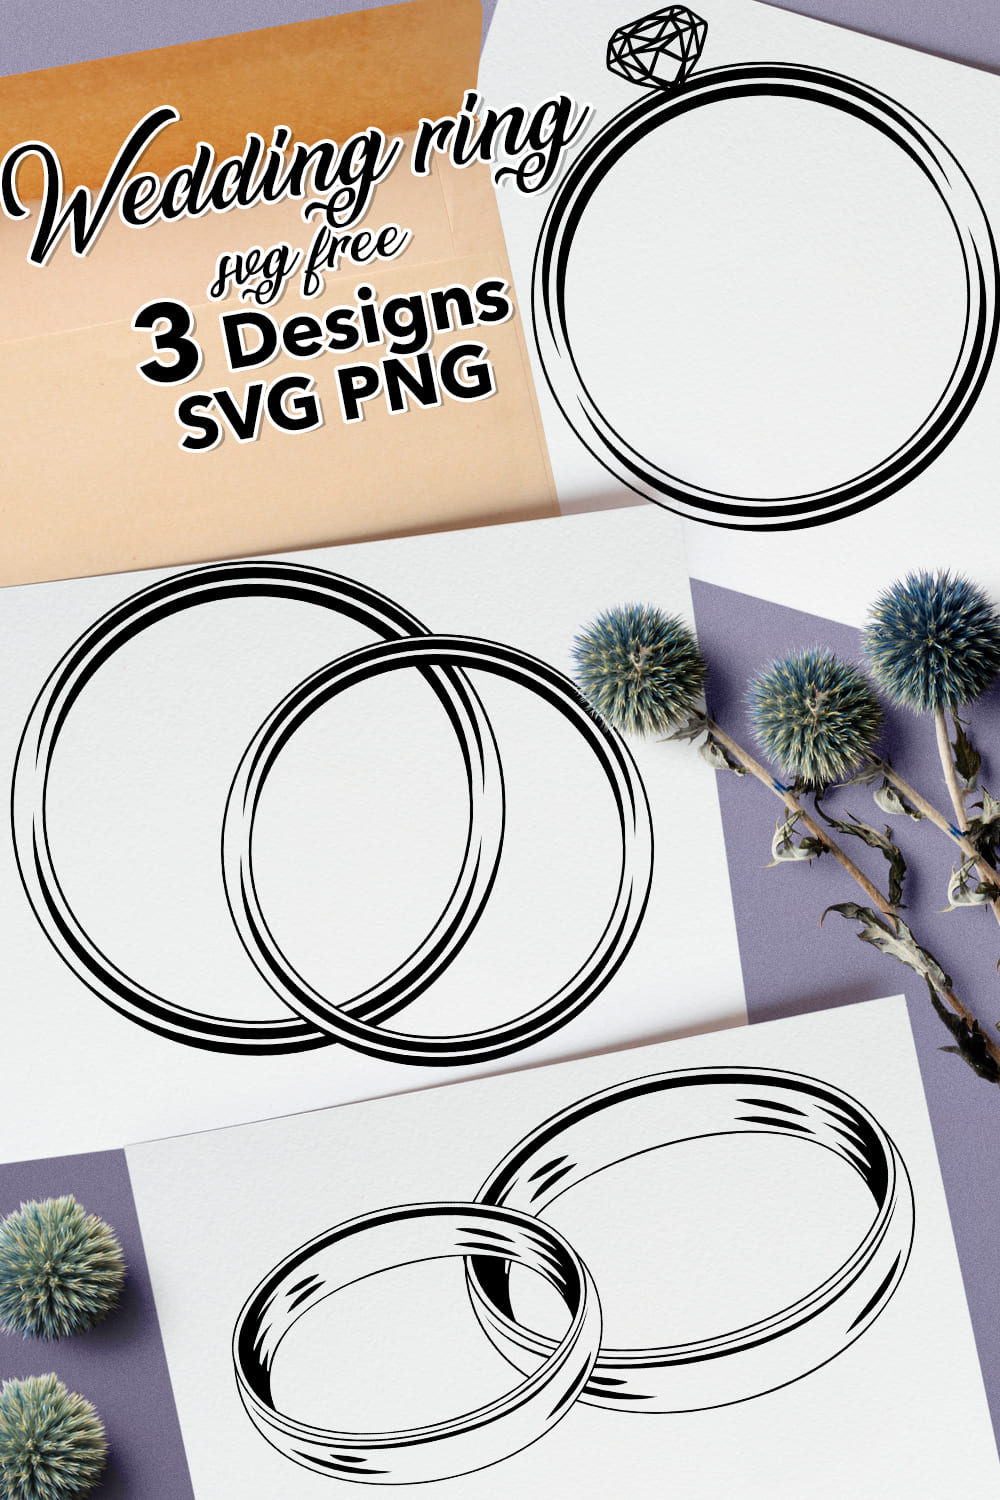 Wedding Ring SVG Free - pinterest image preview.